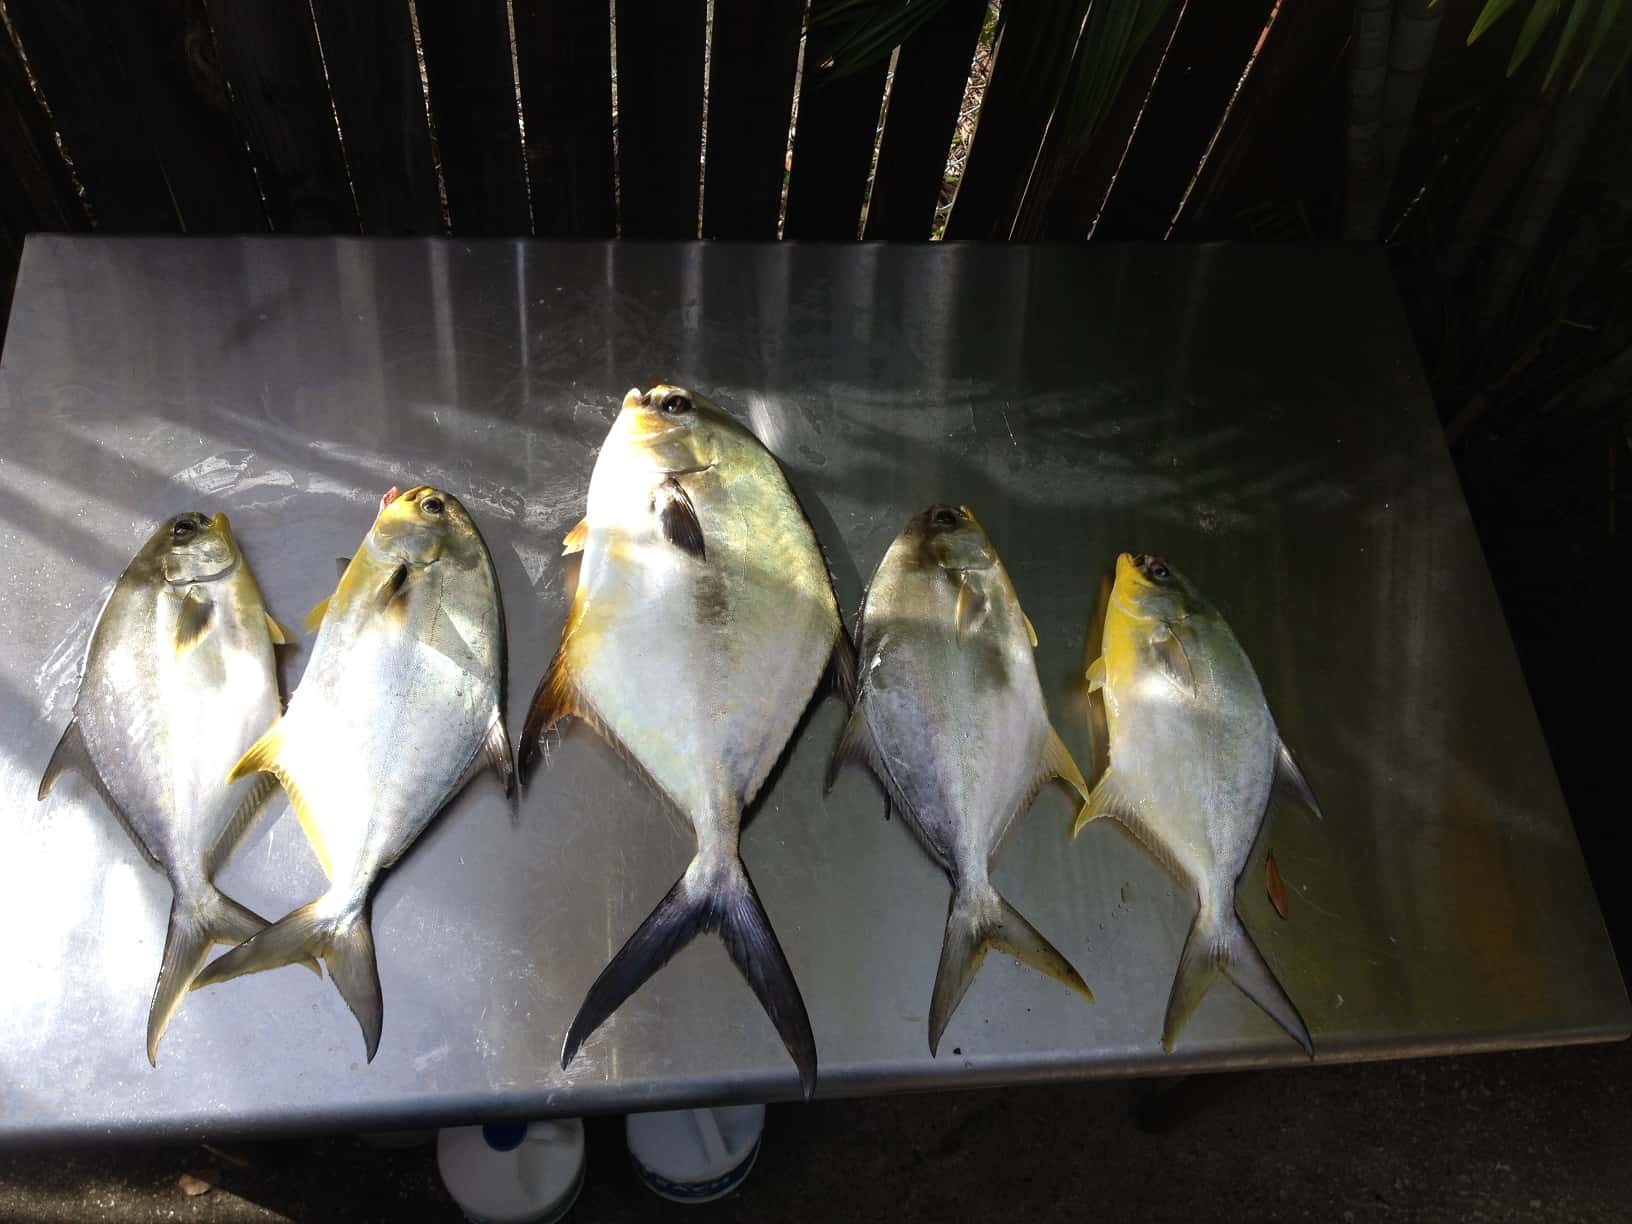 Permit Pompano and Jack Crevalle in the Cold Weather in Tampa Bay